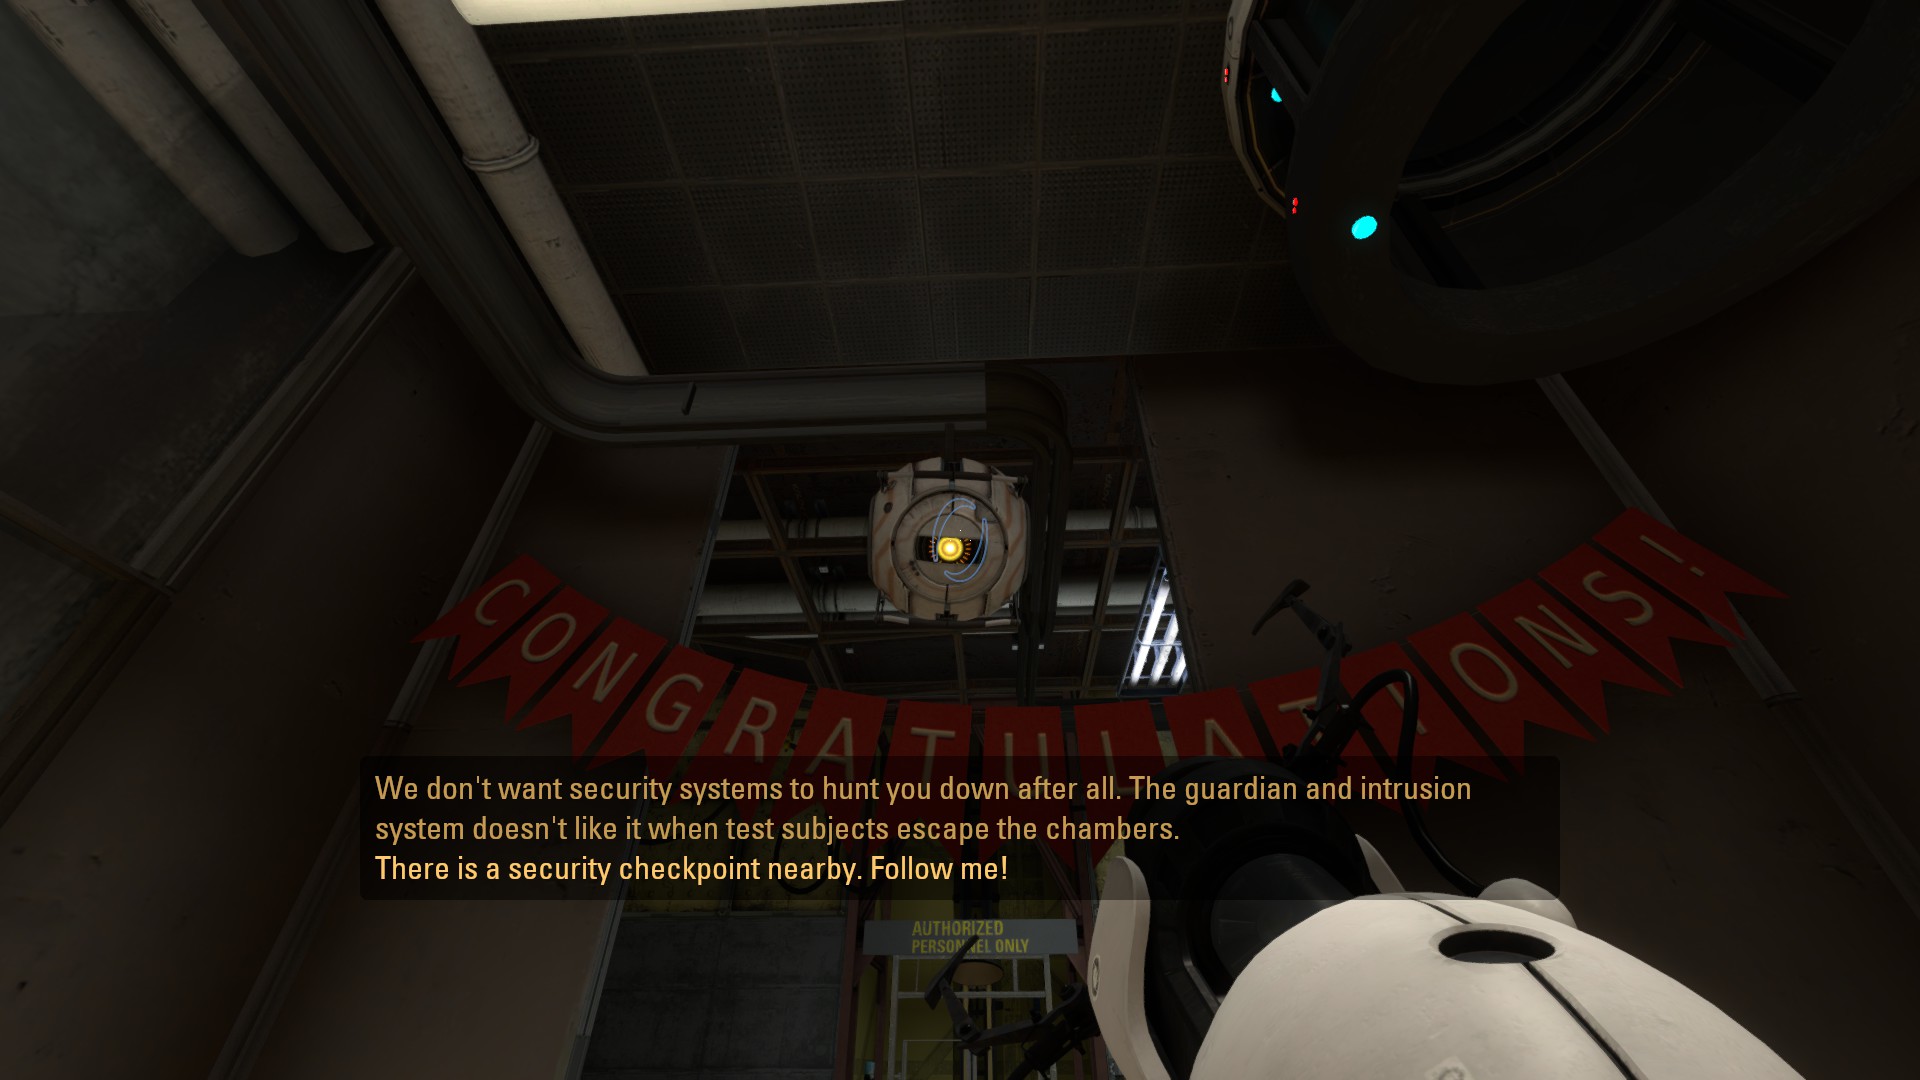 A screenshot of Portal: Revolution. Sterling, a core, is in front of a "Congratulations" sign. He says "We don't want security systems to hunt you down after all. The guardian and intrusion system doesn't like it when test subjects escape the chambers. There is a security checkpoint nearby. Follow me!"

This is referencing the Aperture Employee Guardian and Intrusion System (AEGIS), the main antagonist of Portal Stories Mel.
